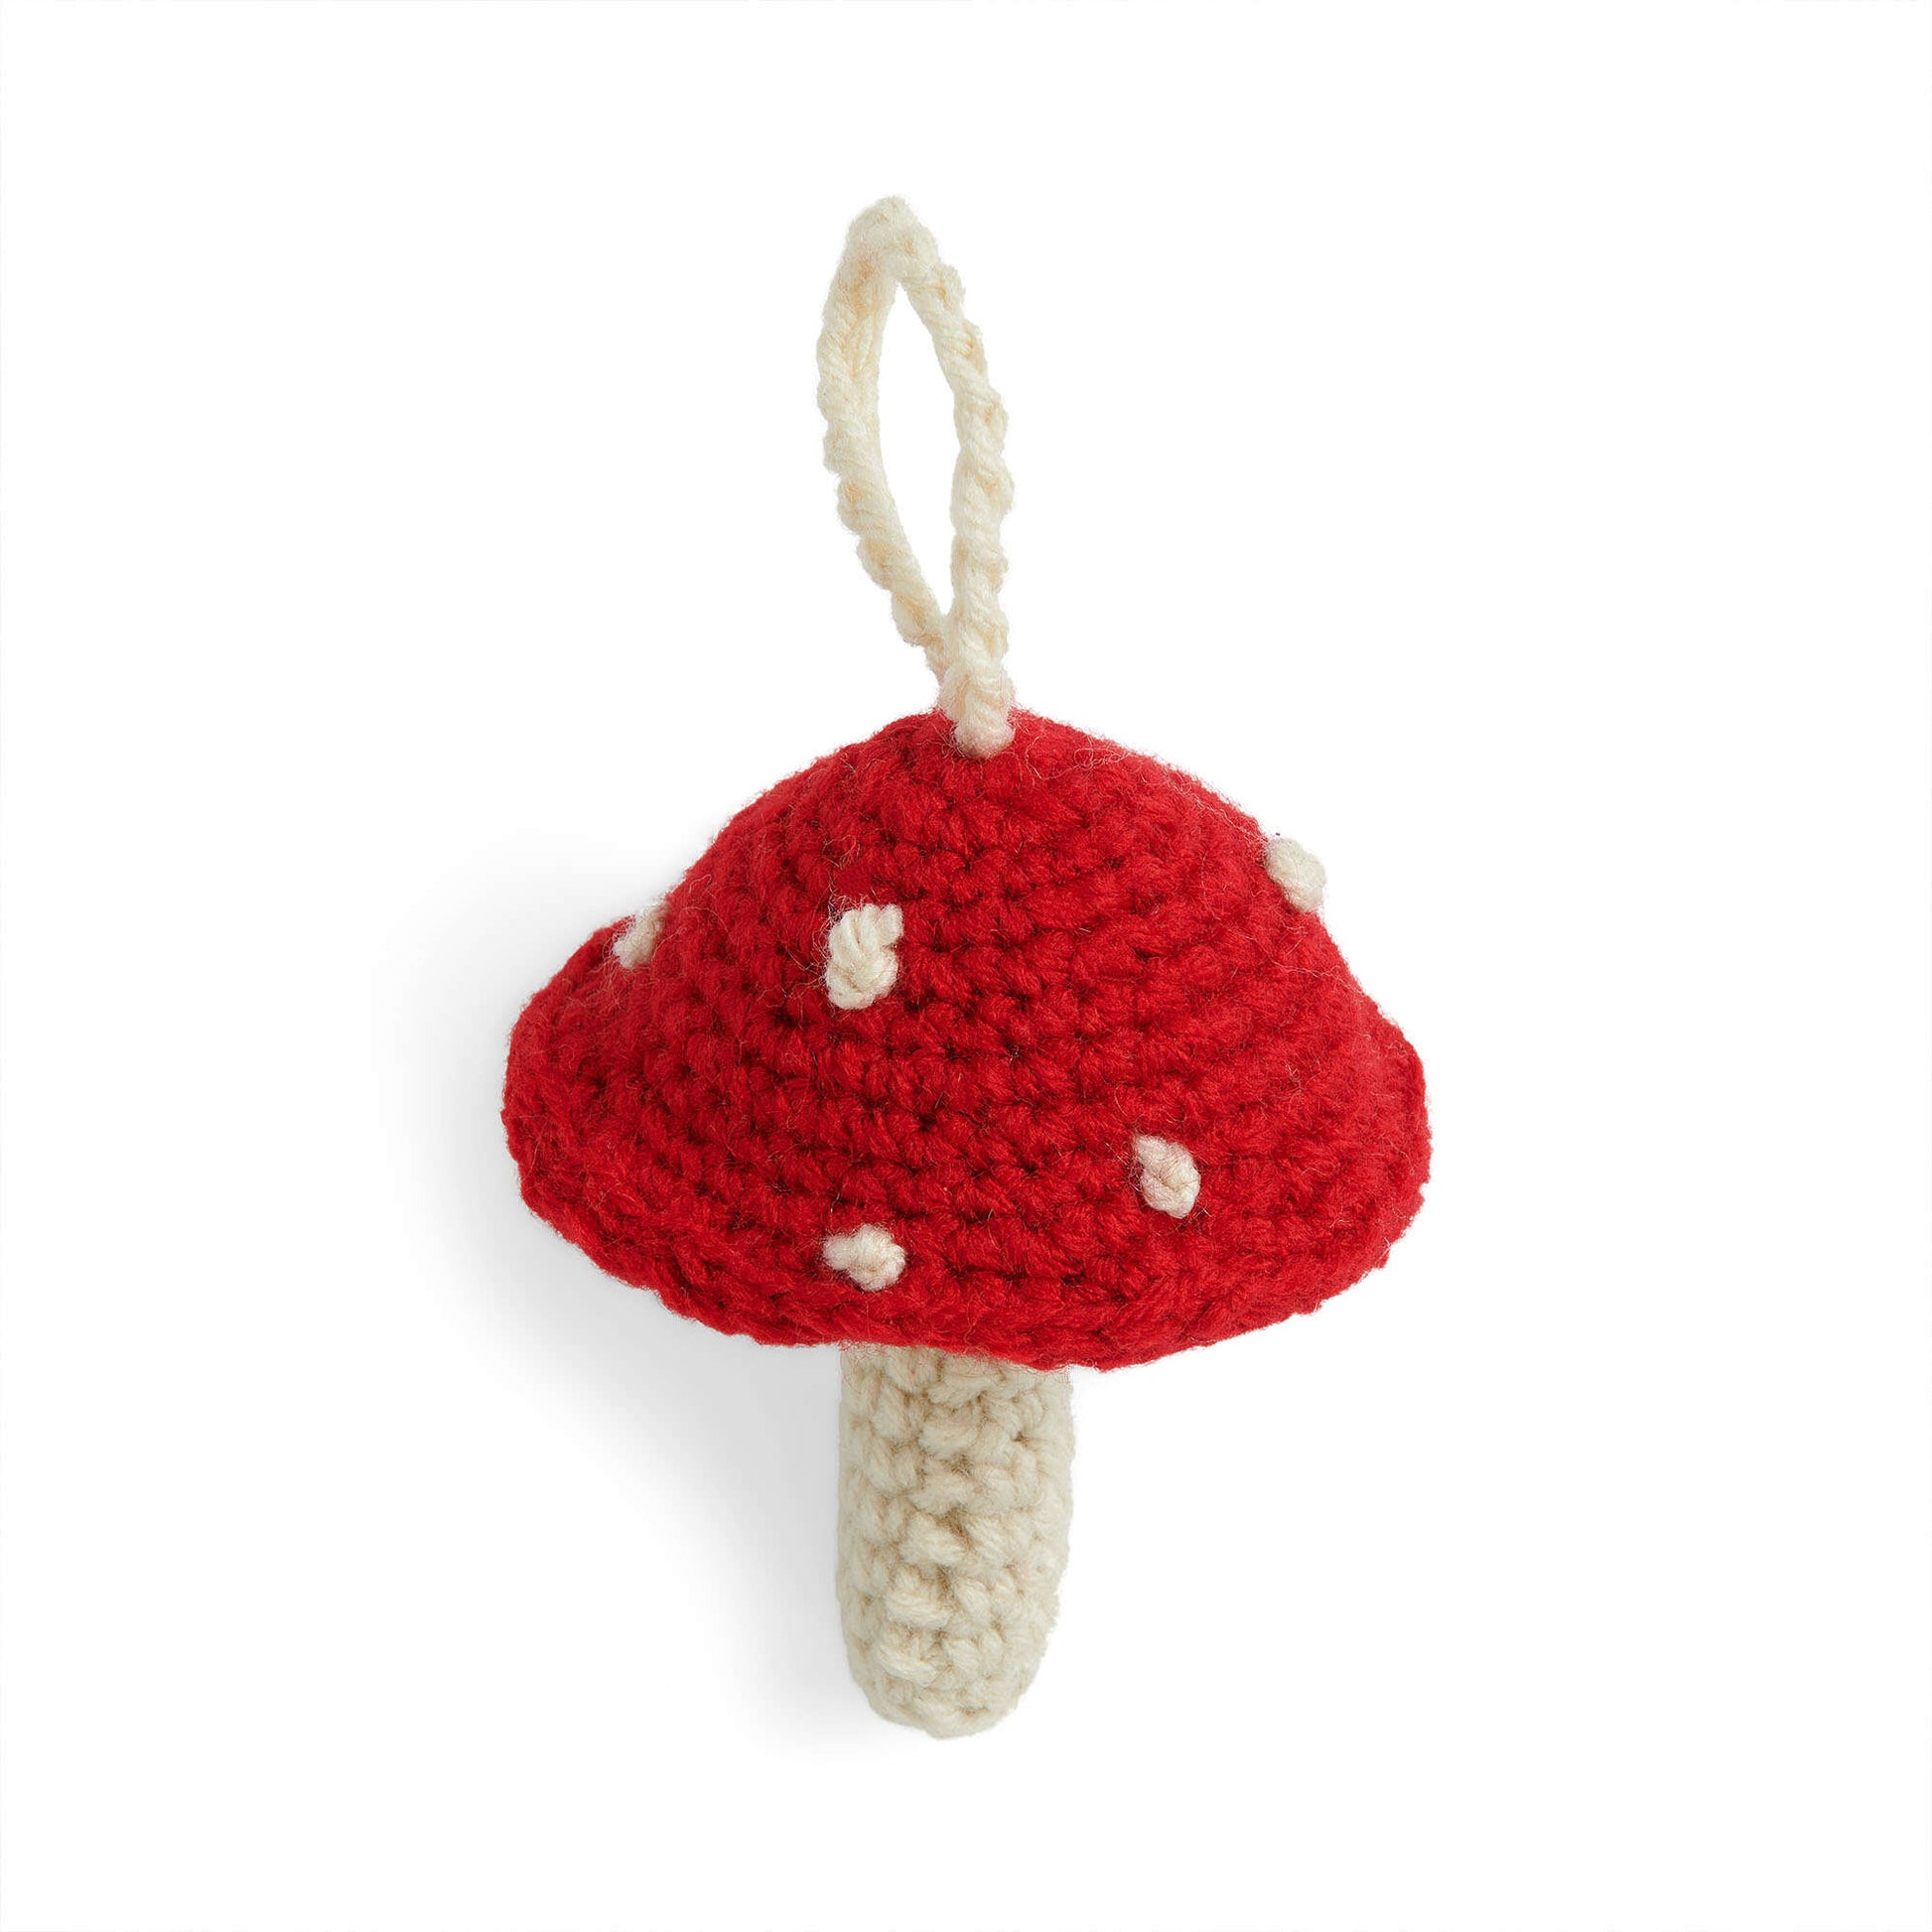 Free Red Heart Cute & Kitschy Crocheted Ornaments Pattern